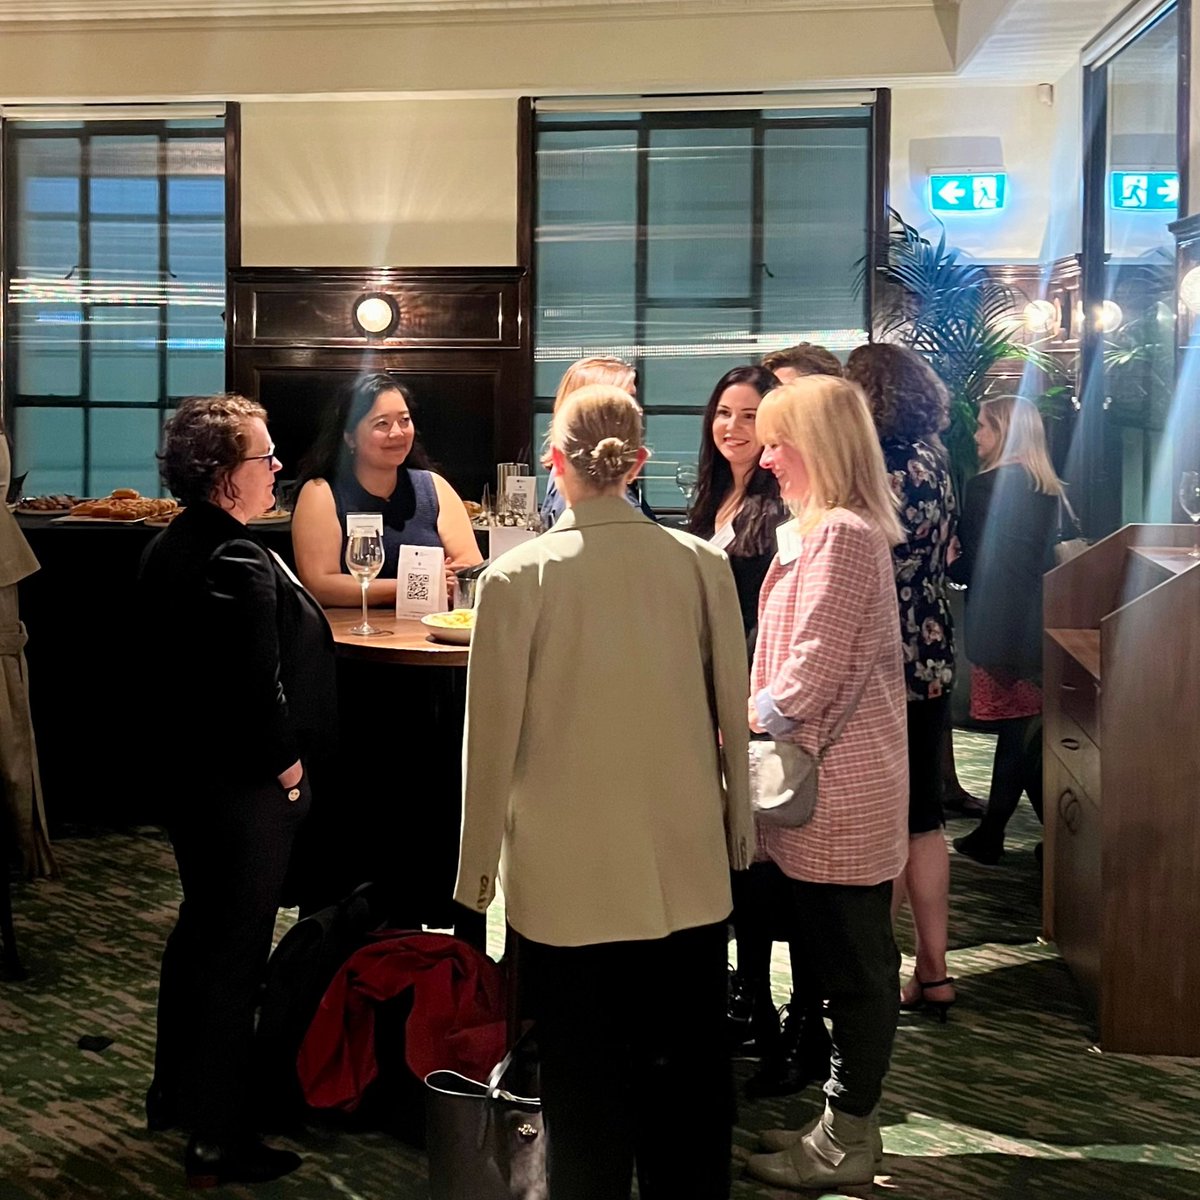 Last night's Chamber Change Networking Event at Morris House was an absolute delight.

Guests heard from one of our inspirational Chamber Change Champions, Chief Operating Officer at @MCEC Helen Fairclough.

Thanks to everyone who attended!